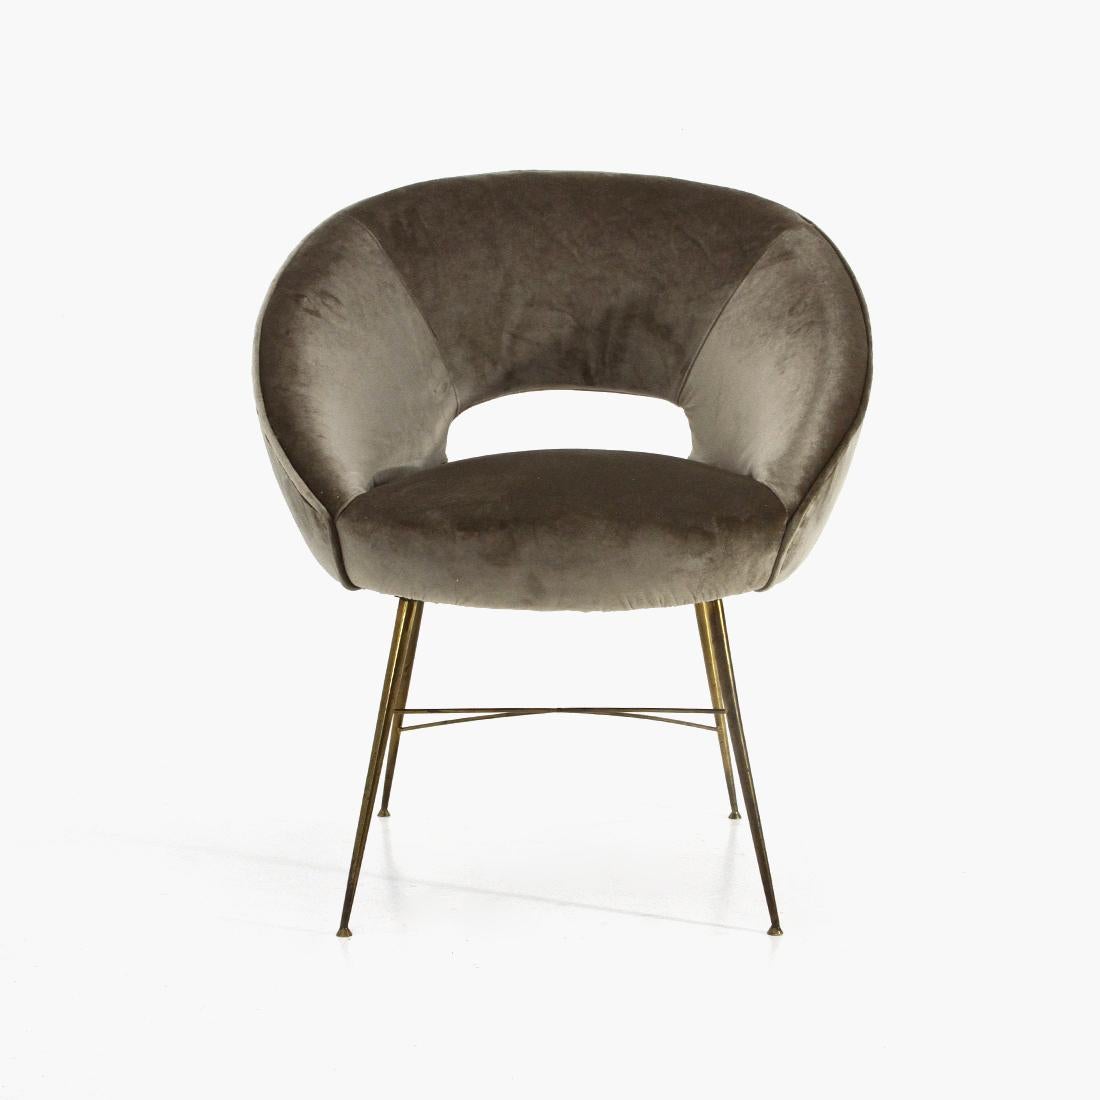 Armchair produced and designed by Silvio Cavatorta in the 1950s.
Support structure in brass.
Wooden shell padded and lined with new gray velvet fabric.
Good general condition, some signs due to normal use over time.

Dimensions: Length 66 cm -